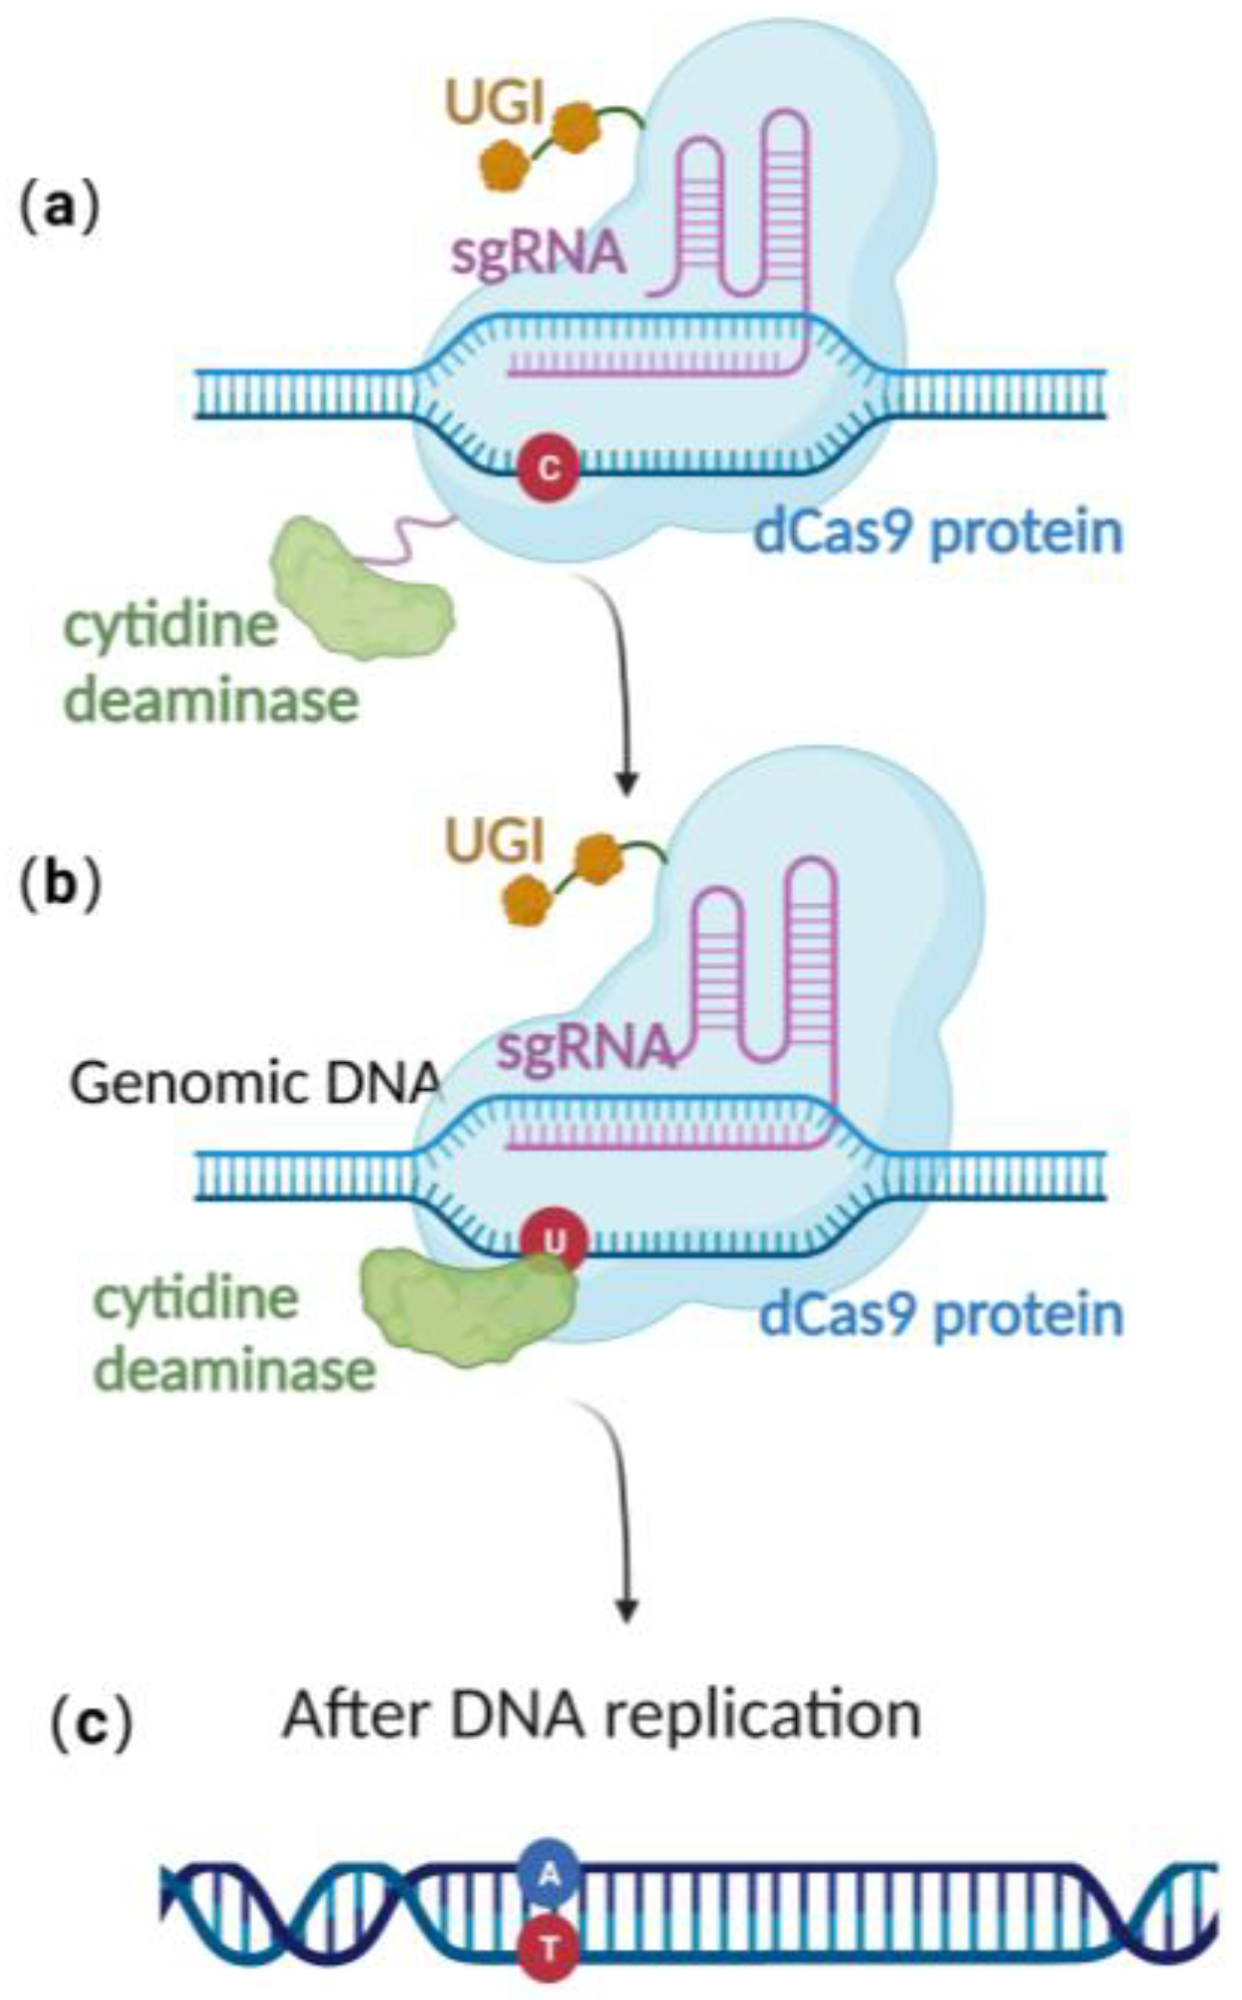 Schematic diagram of base editing method: (a) dCas9 mediates targeting without DSB formation; (b) cytosine deaminase converts C to U; (c) single-base precise editing is complete with the replication of DNA.